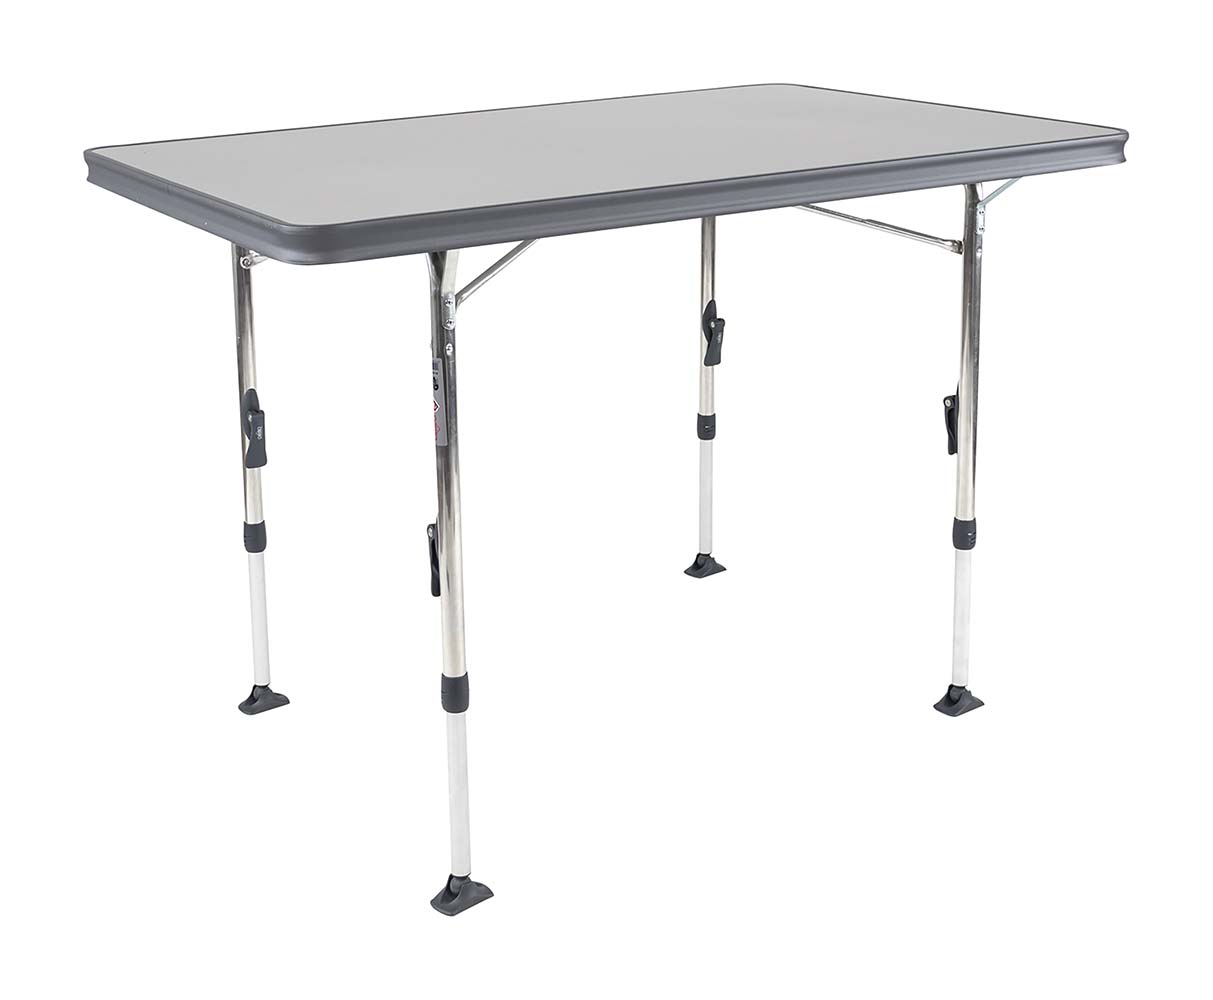 1151375 Camping table with an aluminium frame and- edge. Reinforced construction ensures a stable and lightweight table. Fitted with a heat resistant and waterproof table top. Base height easily adjusted from 48cm to 71cm. Dimensions: top size: length 110cm and width 70cm. Folded up: length 110cm, width 70cm and height 3.8cm. Weight: 6.9kg, maximum load-bearing capacity: 50kg. Colour: anthracite (09).